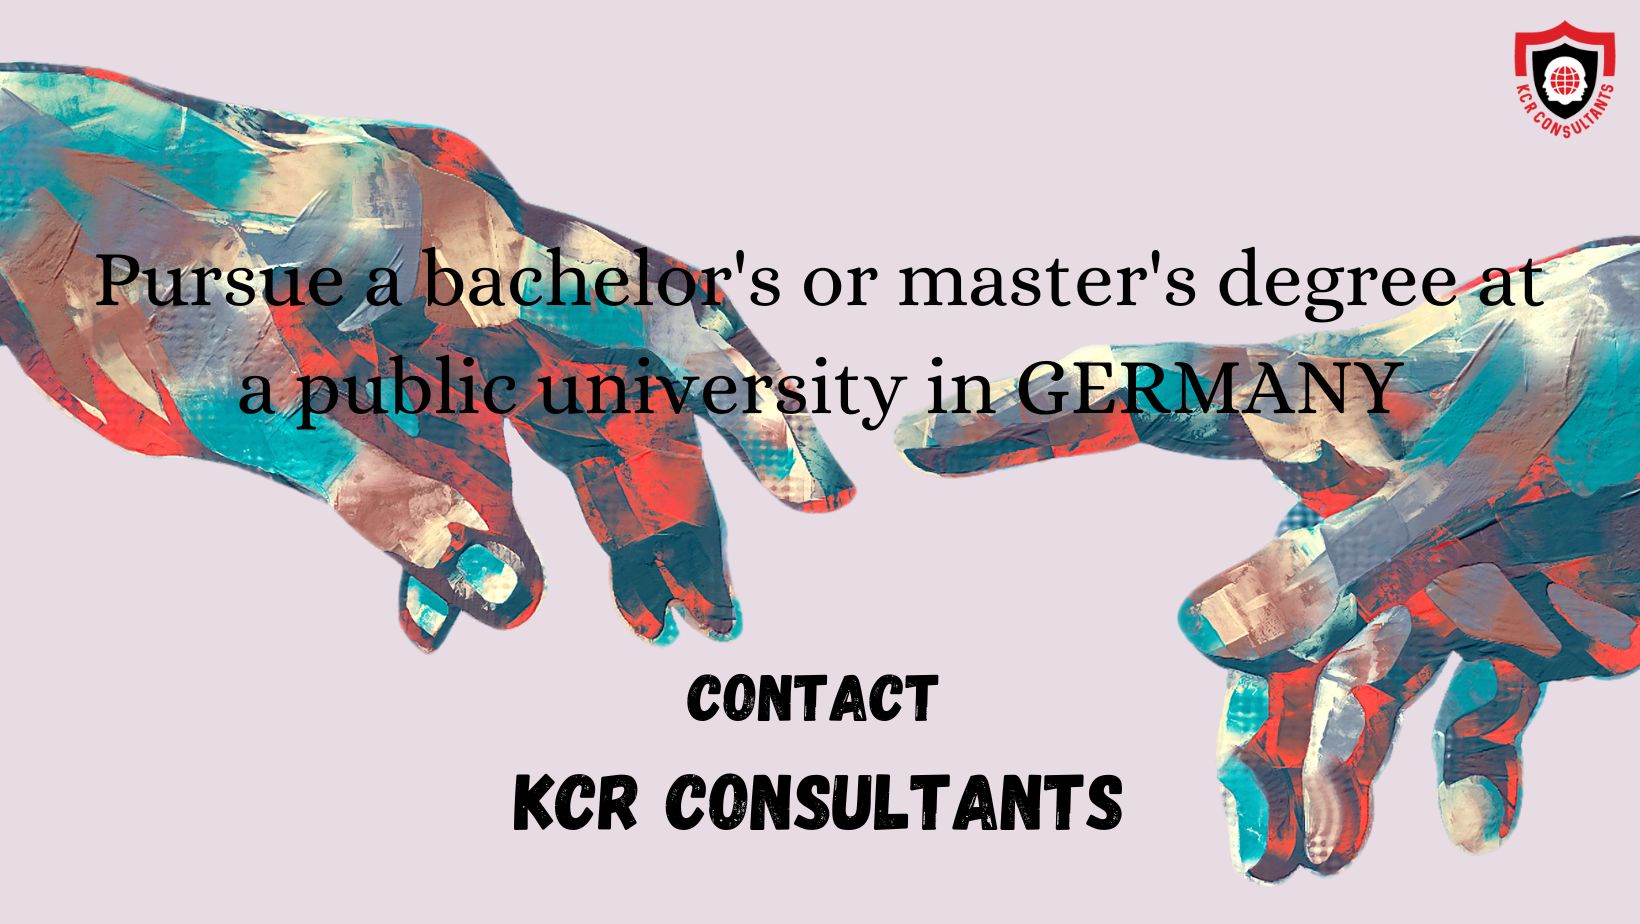 Academy of Fine Arts Munich - KCR CONSULTANTS - Contact us